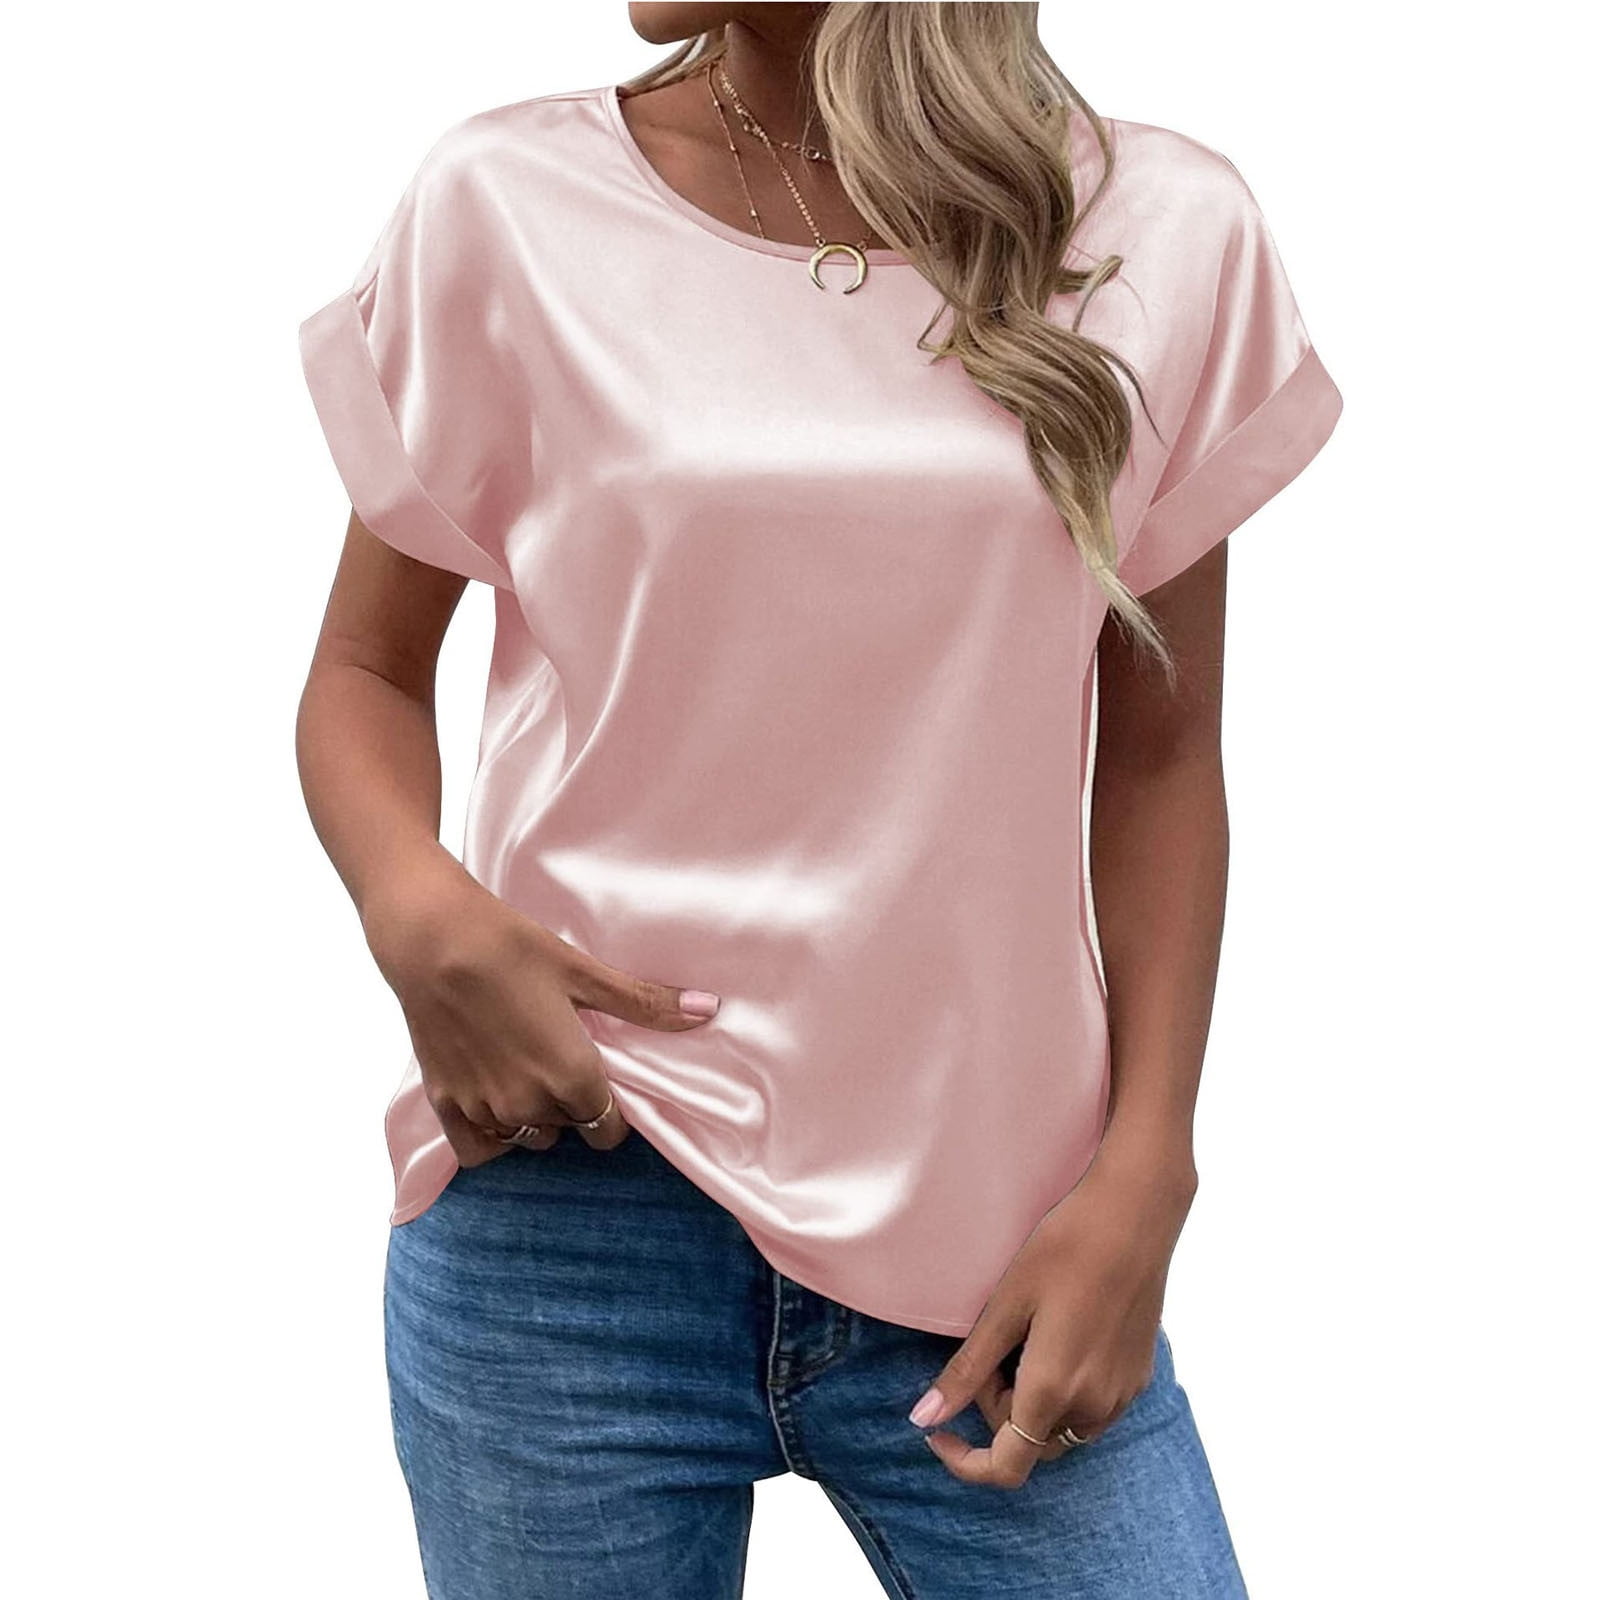 Shop for Blouses, Tops & T-Shirts, Womens